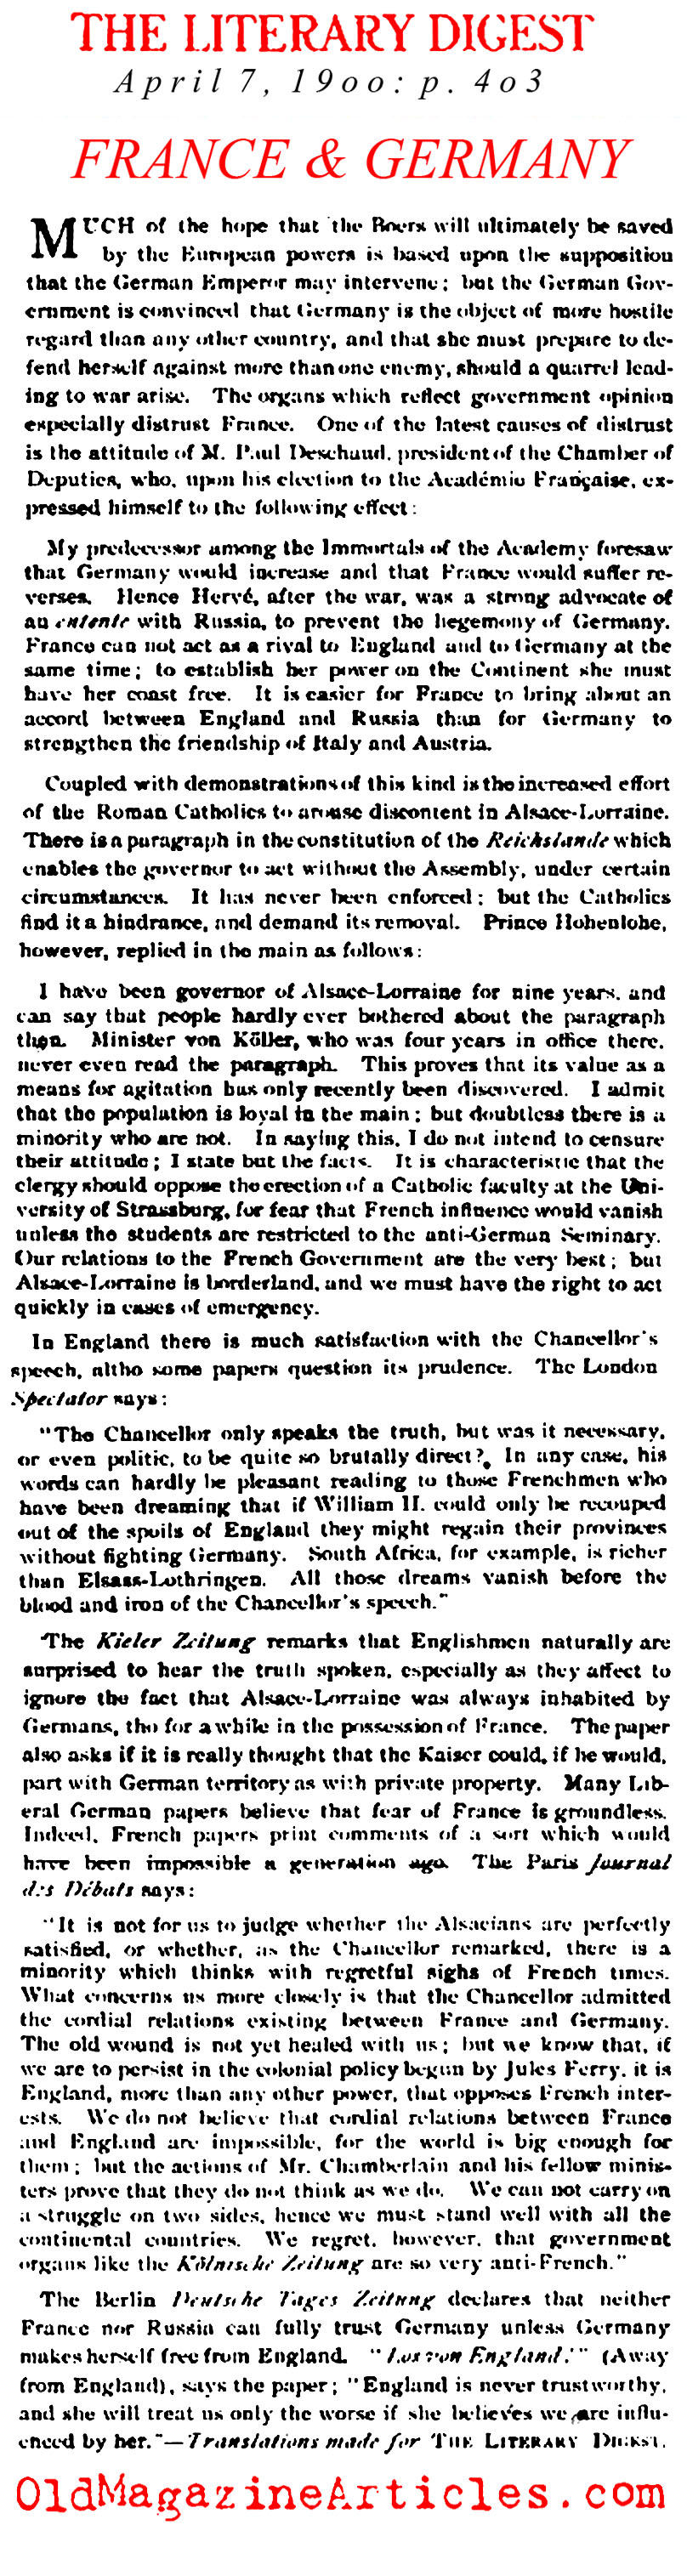 France, Germany & Alsace-Lorraine (Literary Digest, 1900)